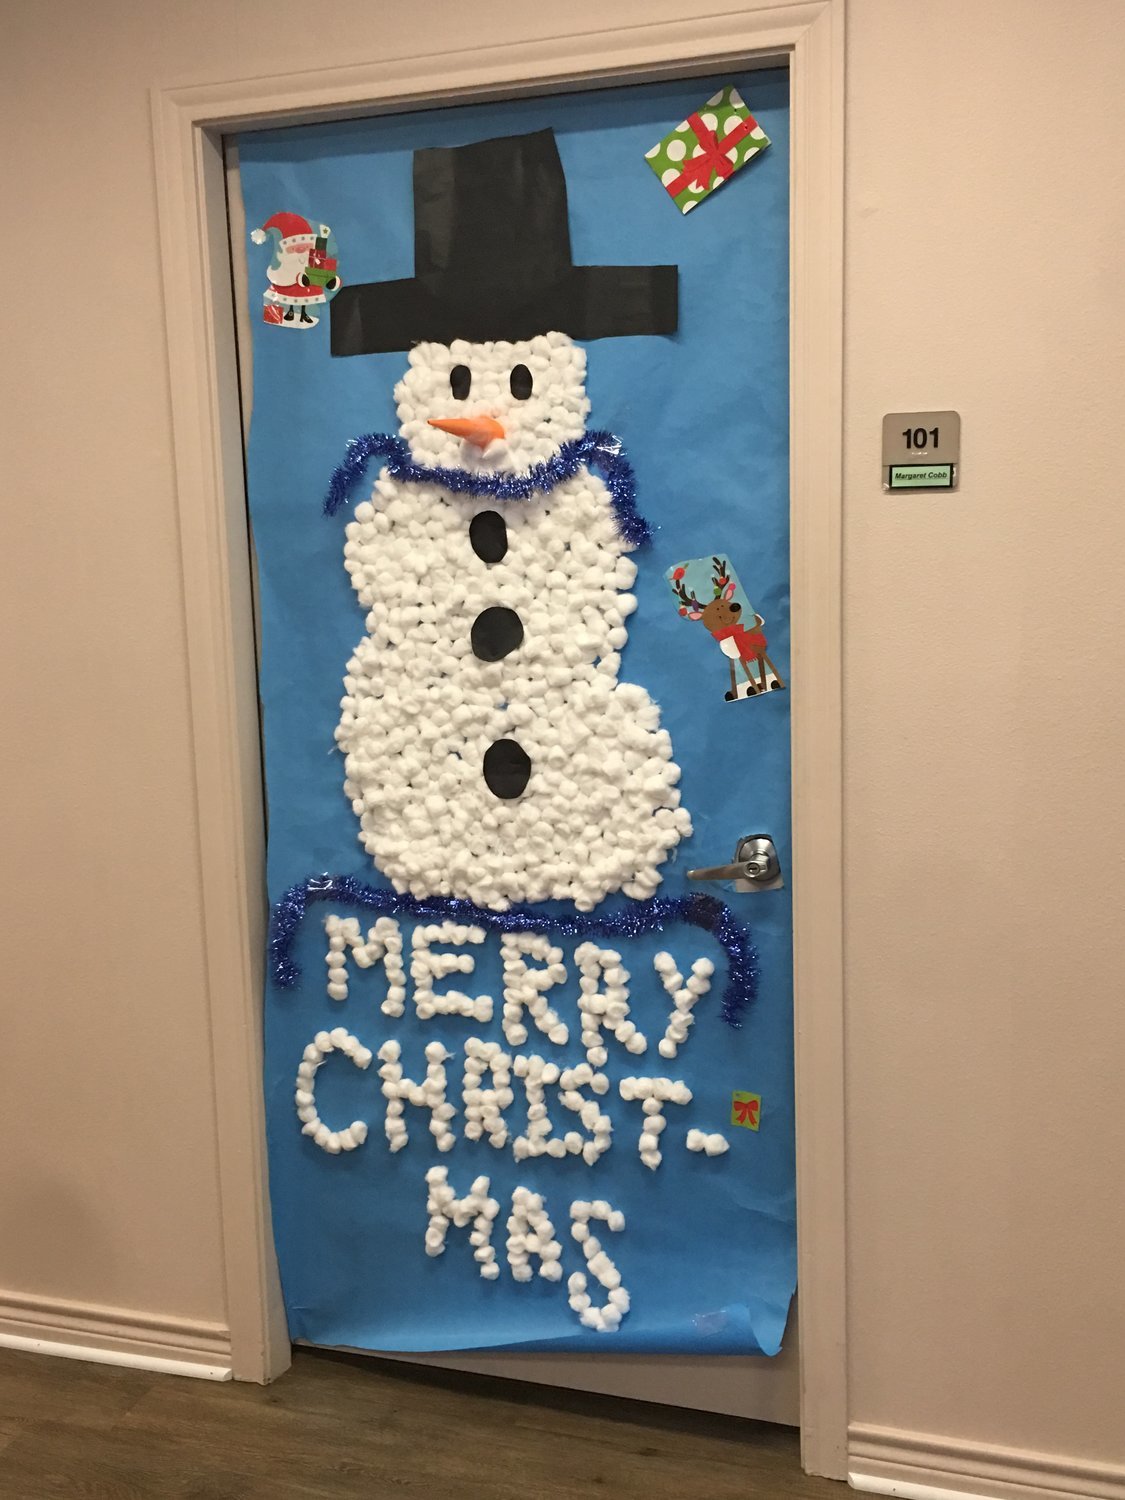 Wesley House resident Margaret “Margo” Cobb’s door featuring a snowman decoration created by Quitman High School athletes. (Monitor photos by Zak Wellerman).